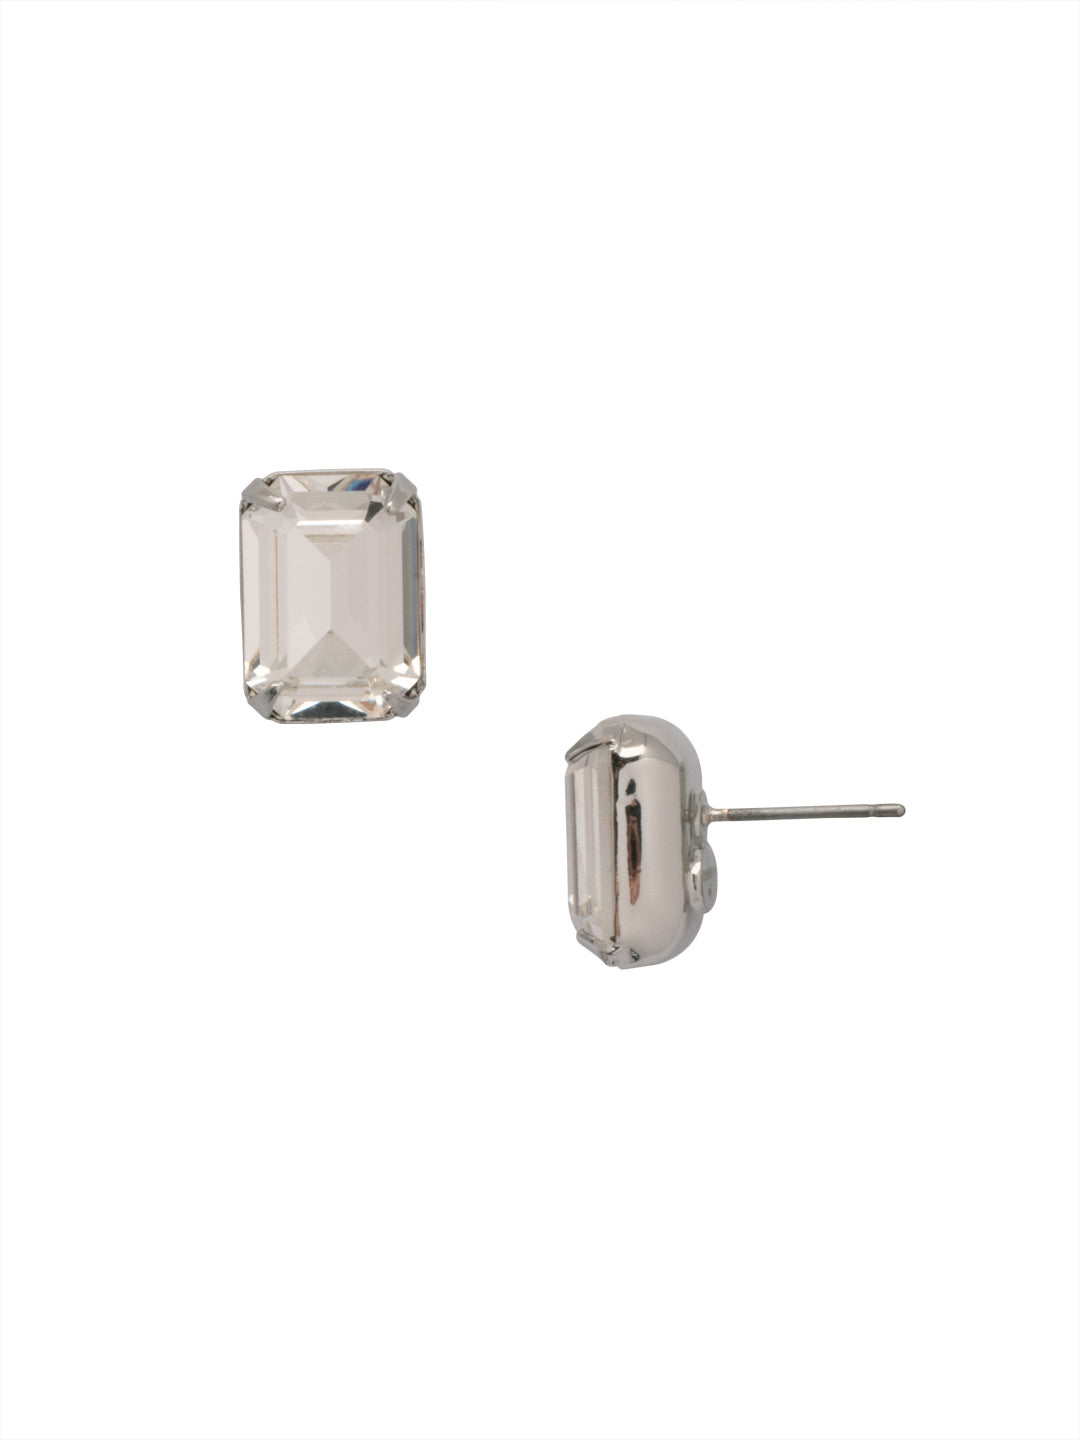 Everyday Stud Earrings - ECT11PDCRY - <p>Simple studs never go out of style! Try this single cut crystal on a post for everyday sparkle. From Sorrelli's Crystal collection in our Palladium finish.</p>